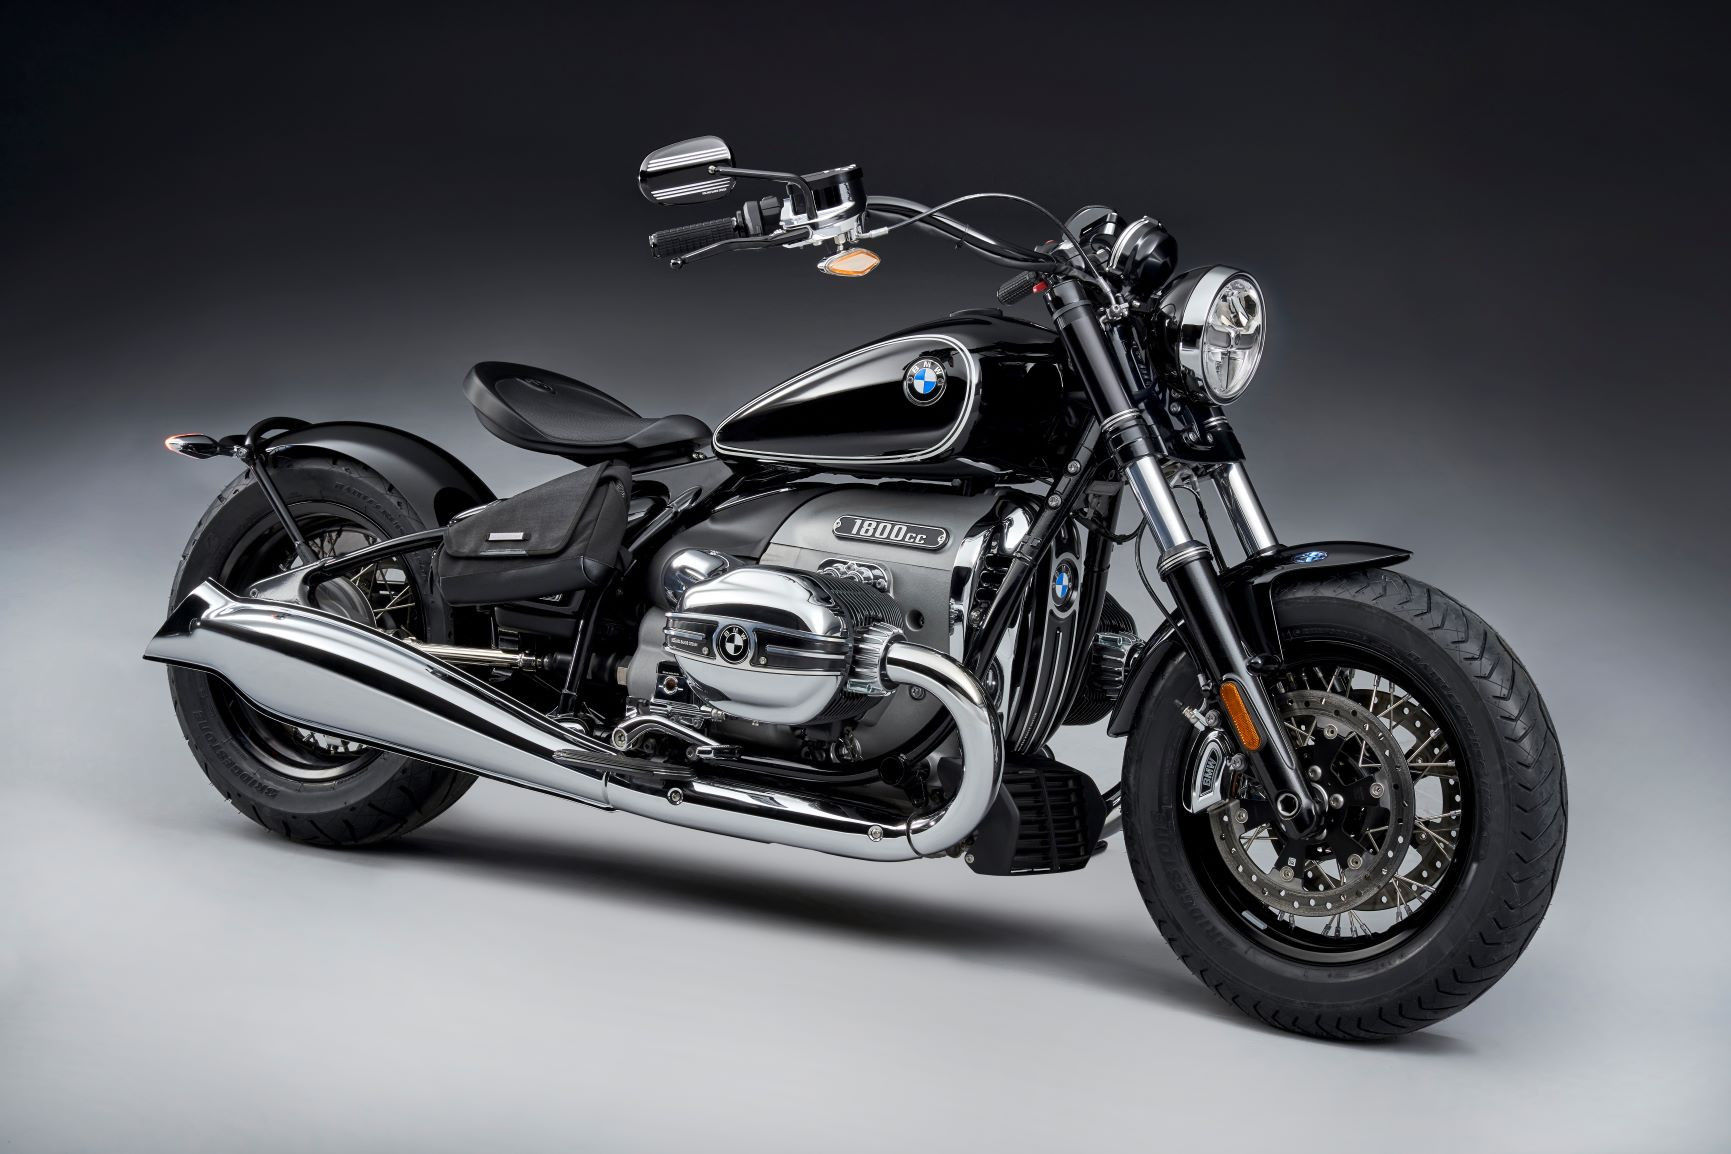 Bmw Introduces 1800cc Air Cooled Twin Cylinder 21 R 18 Cruiser Roadracing World Magazine Motorcycle Riding Racing Tech News